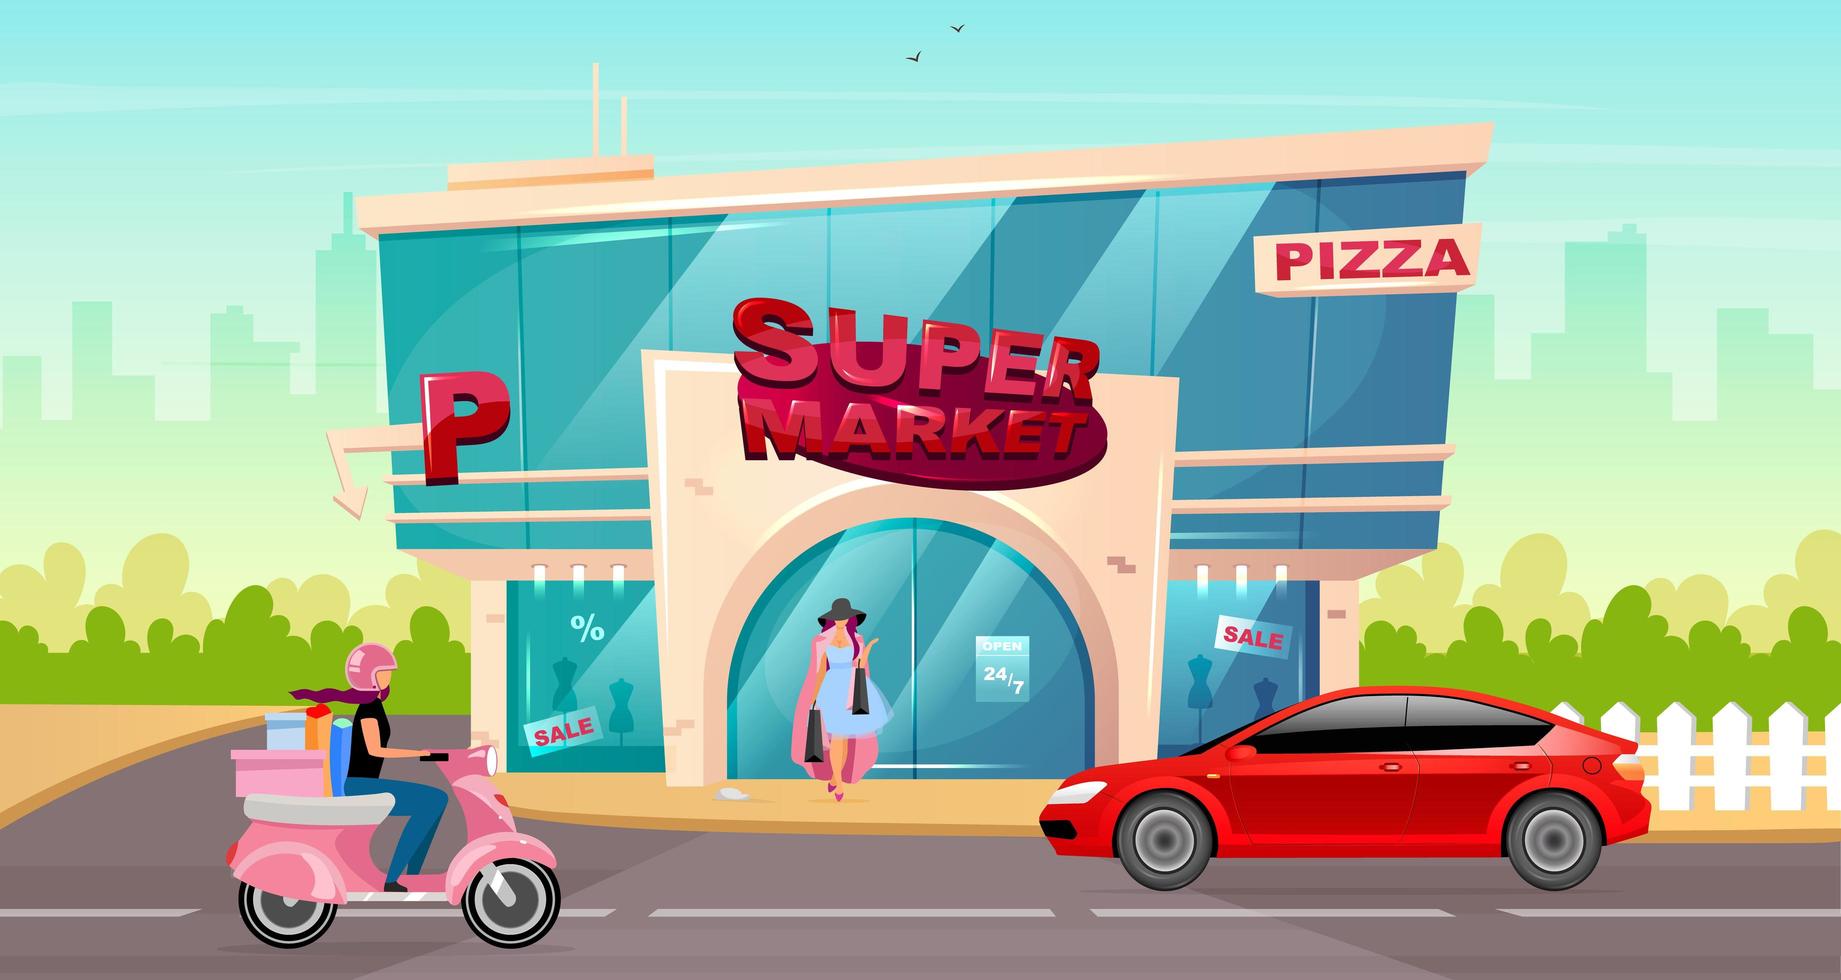 Supermarket entrance in the city vector